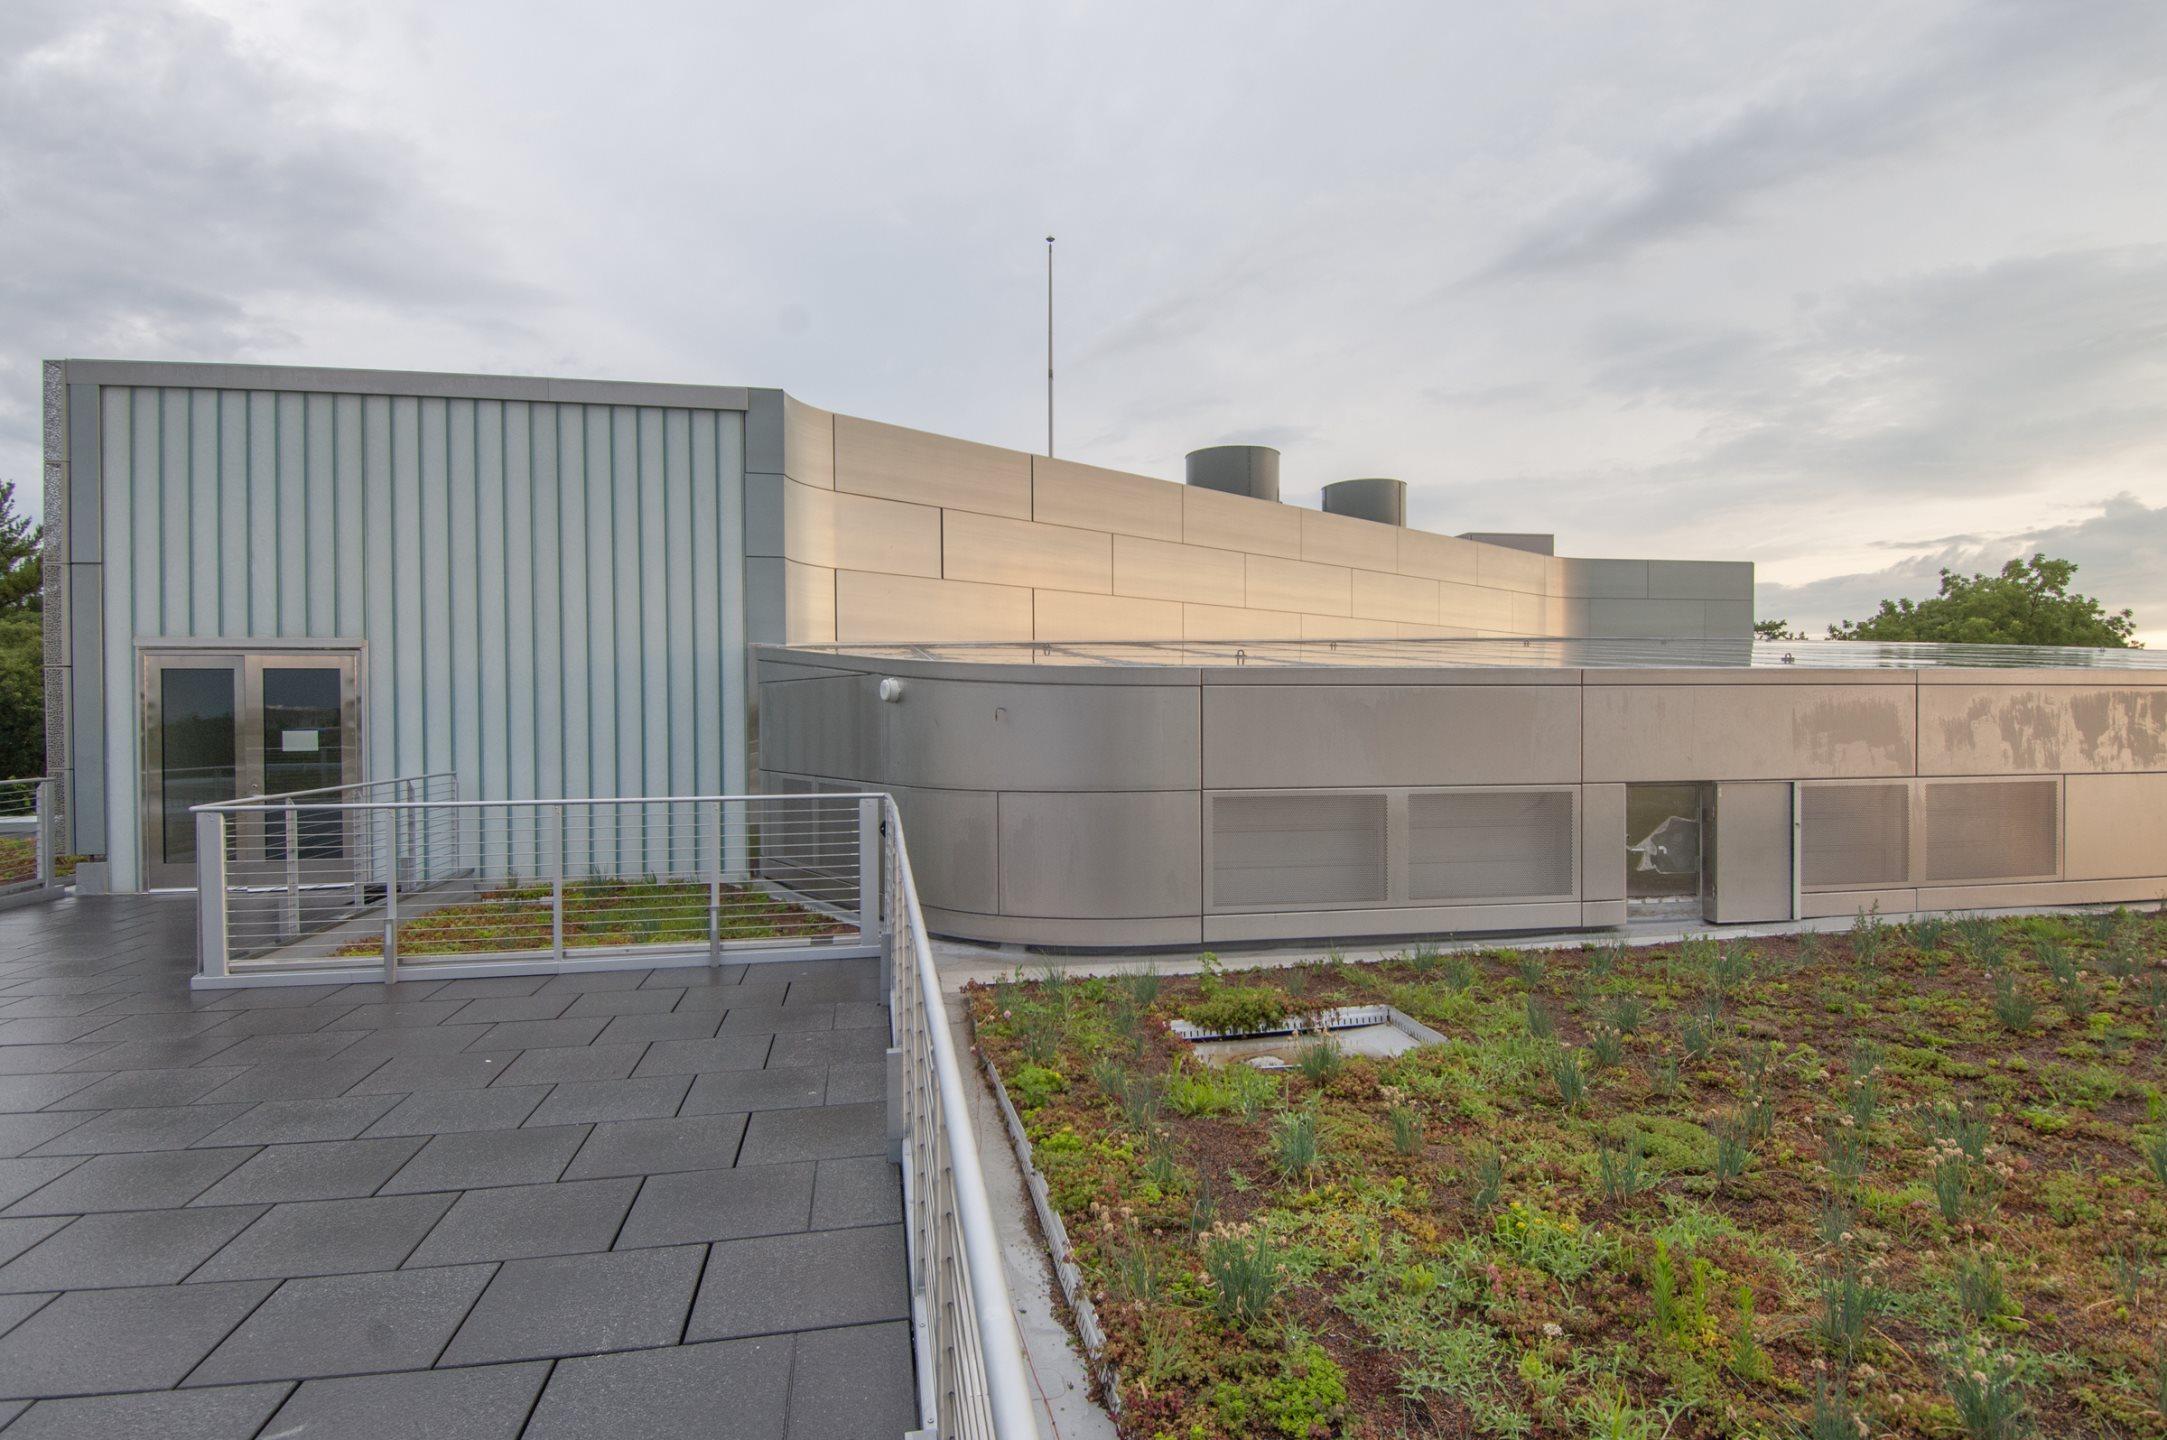 UI Visual Arts Building receives LEED Gold certification